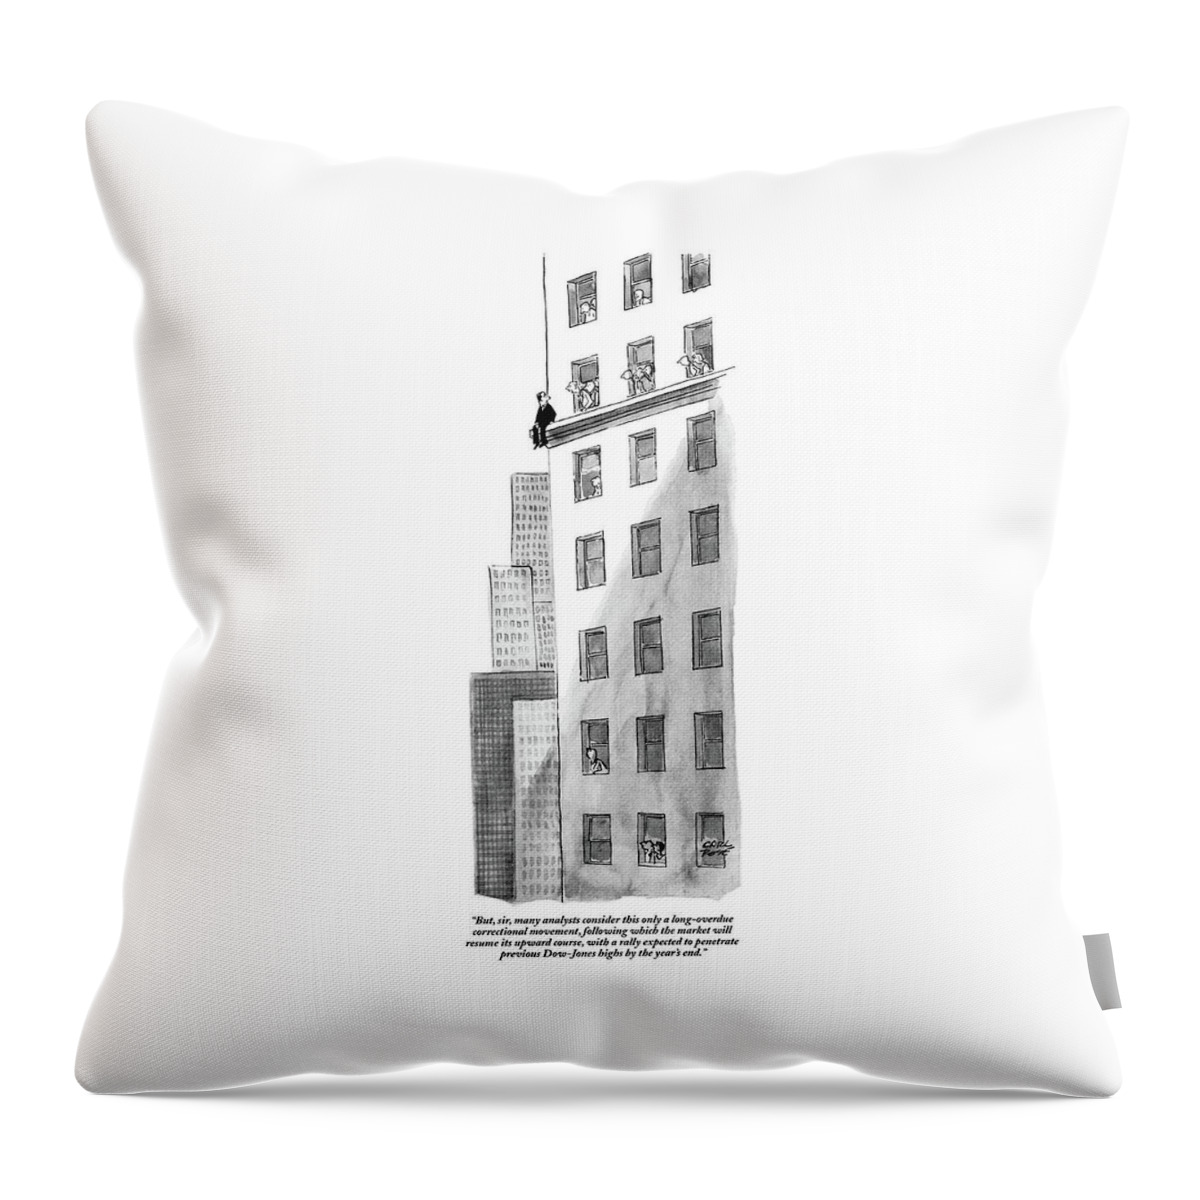 But, Sir, Many Analysts Consider This Only Throw Pillow